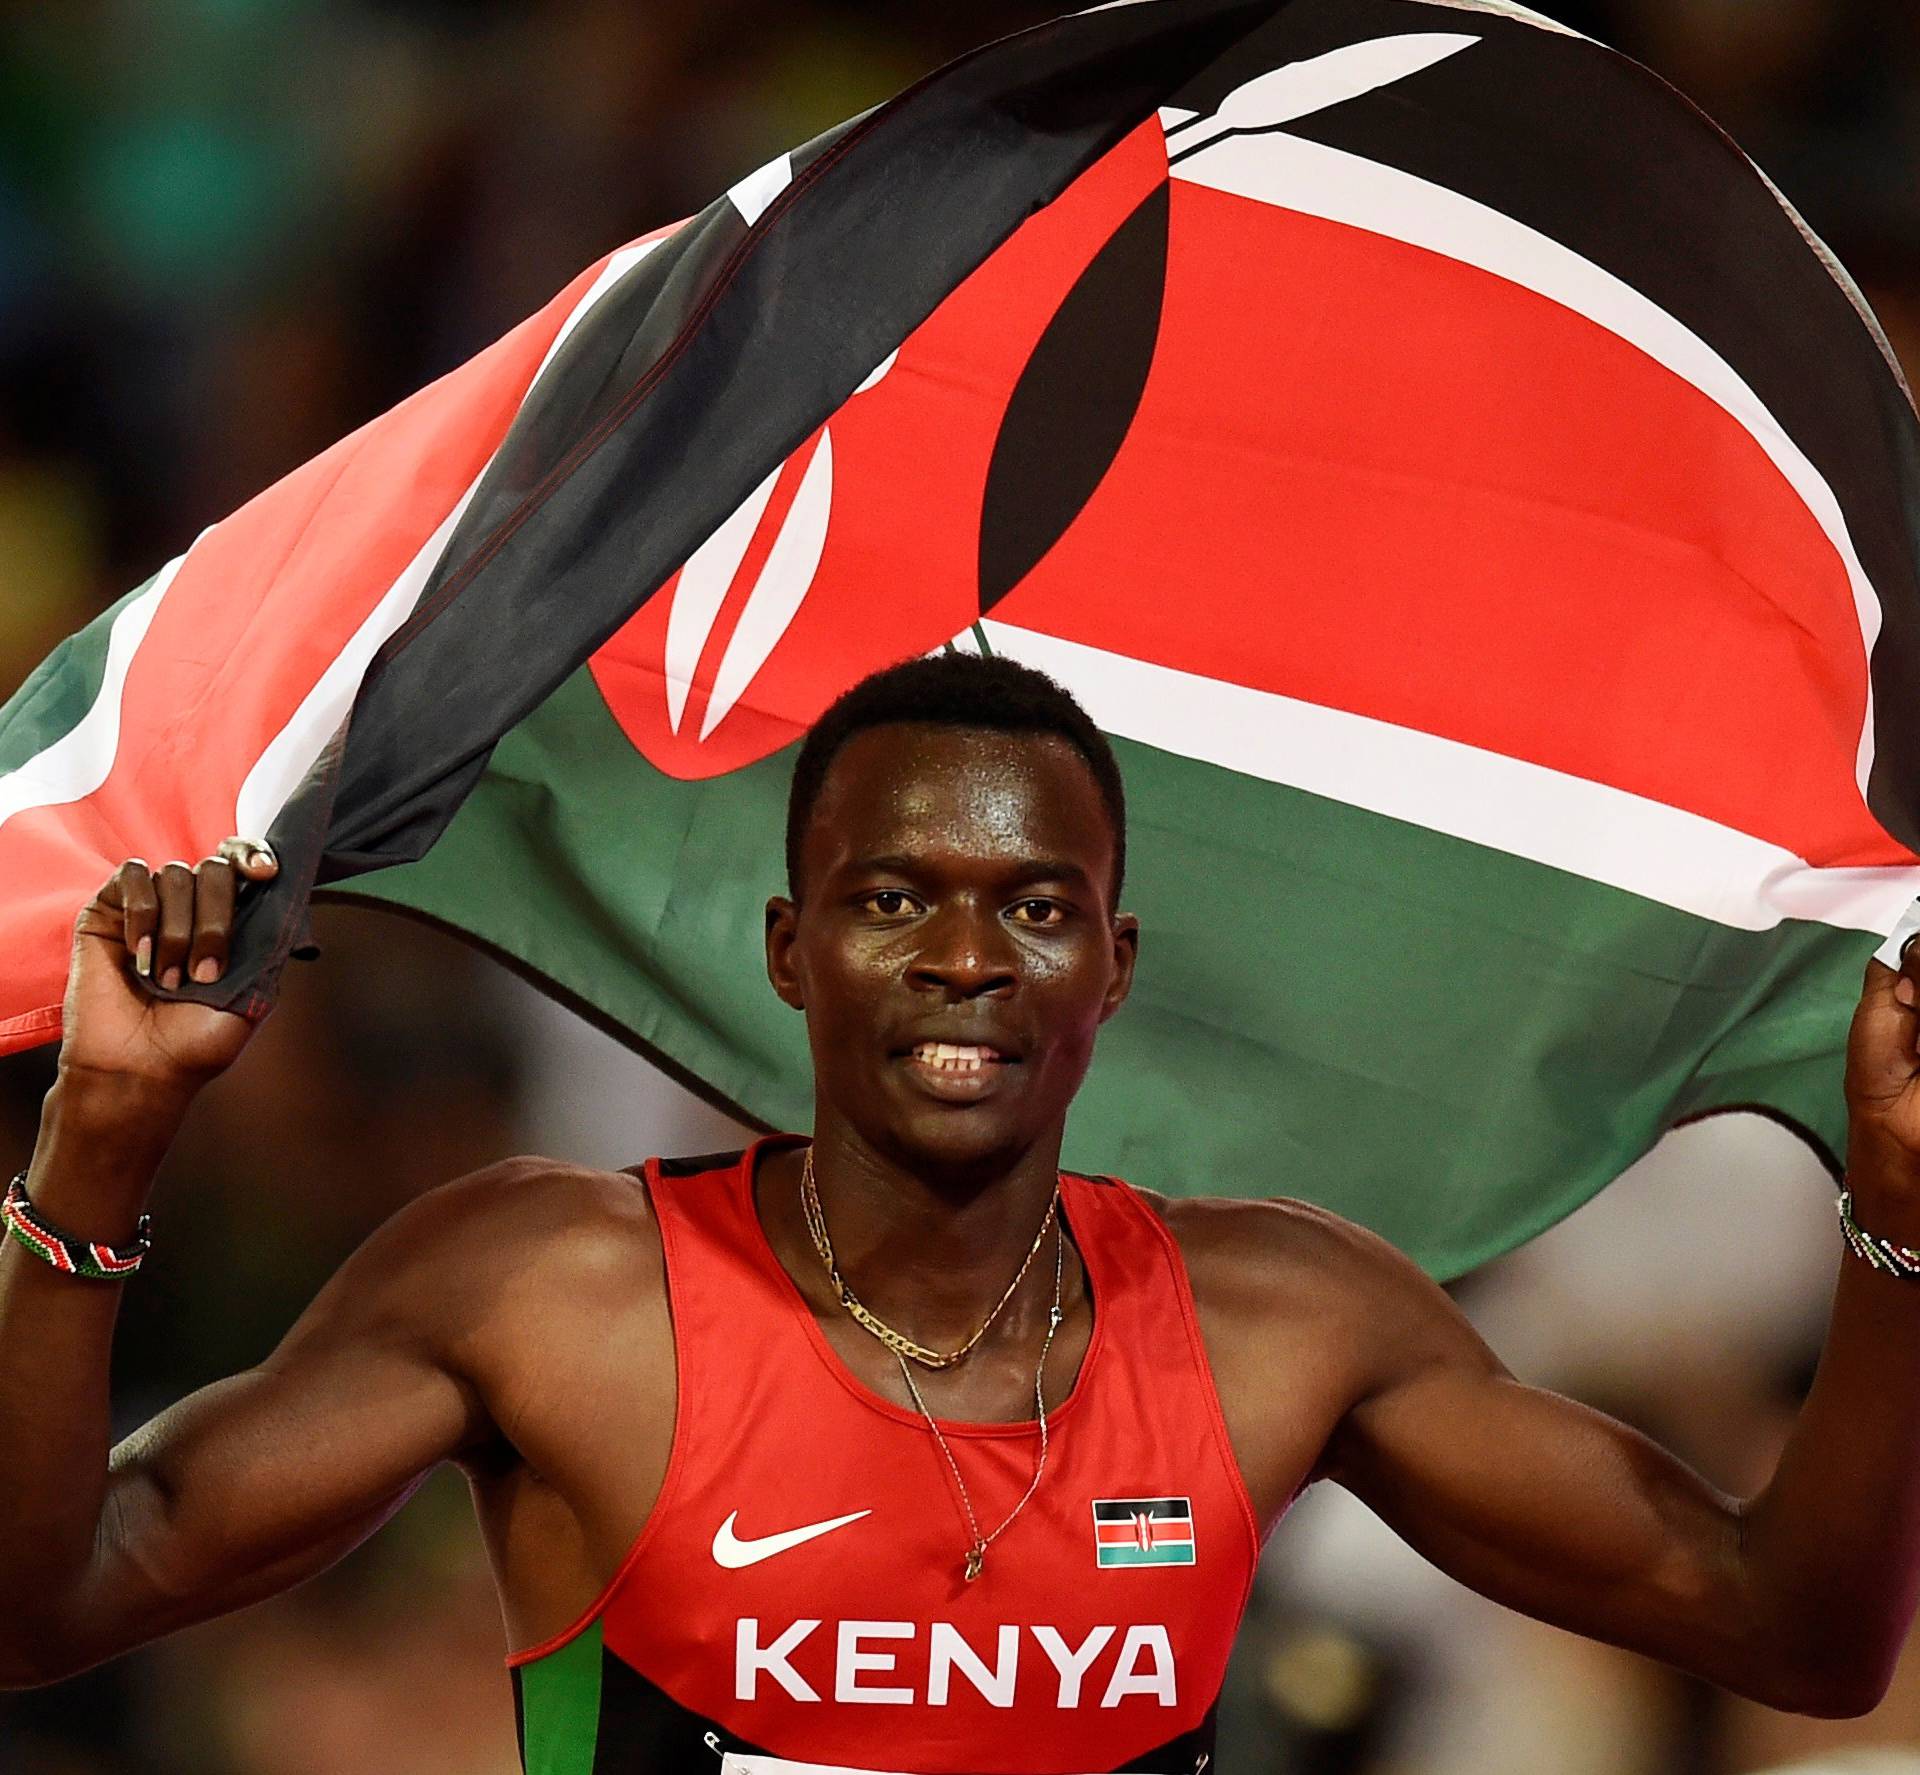 FILE PHOTO: Nicholas Bett of Kenya celebrates with his national flag after winning the men's 400 metres hurdles final during the 15th IAAF World Championships at the National Stadium in Beijing